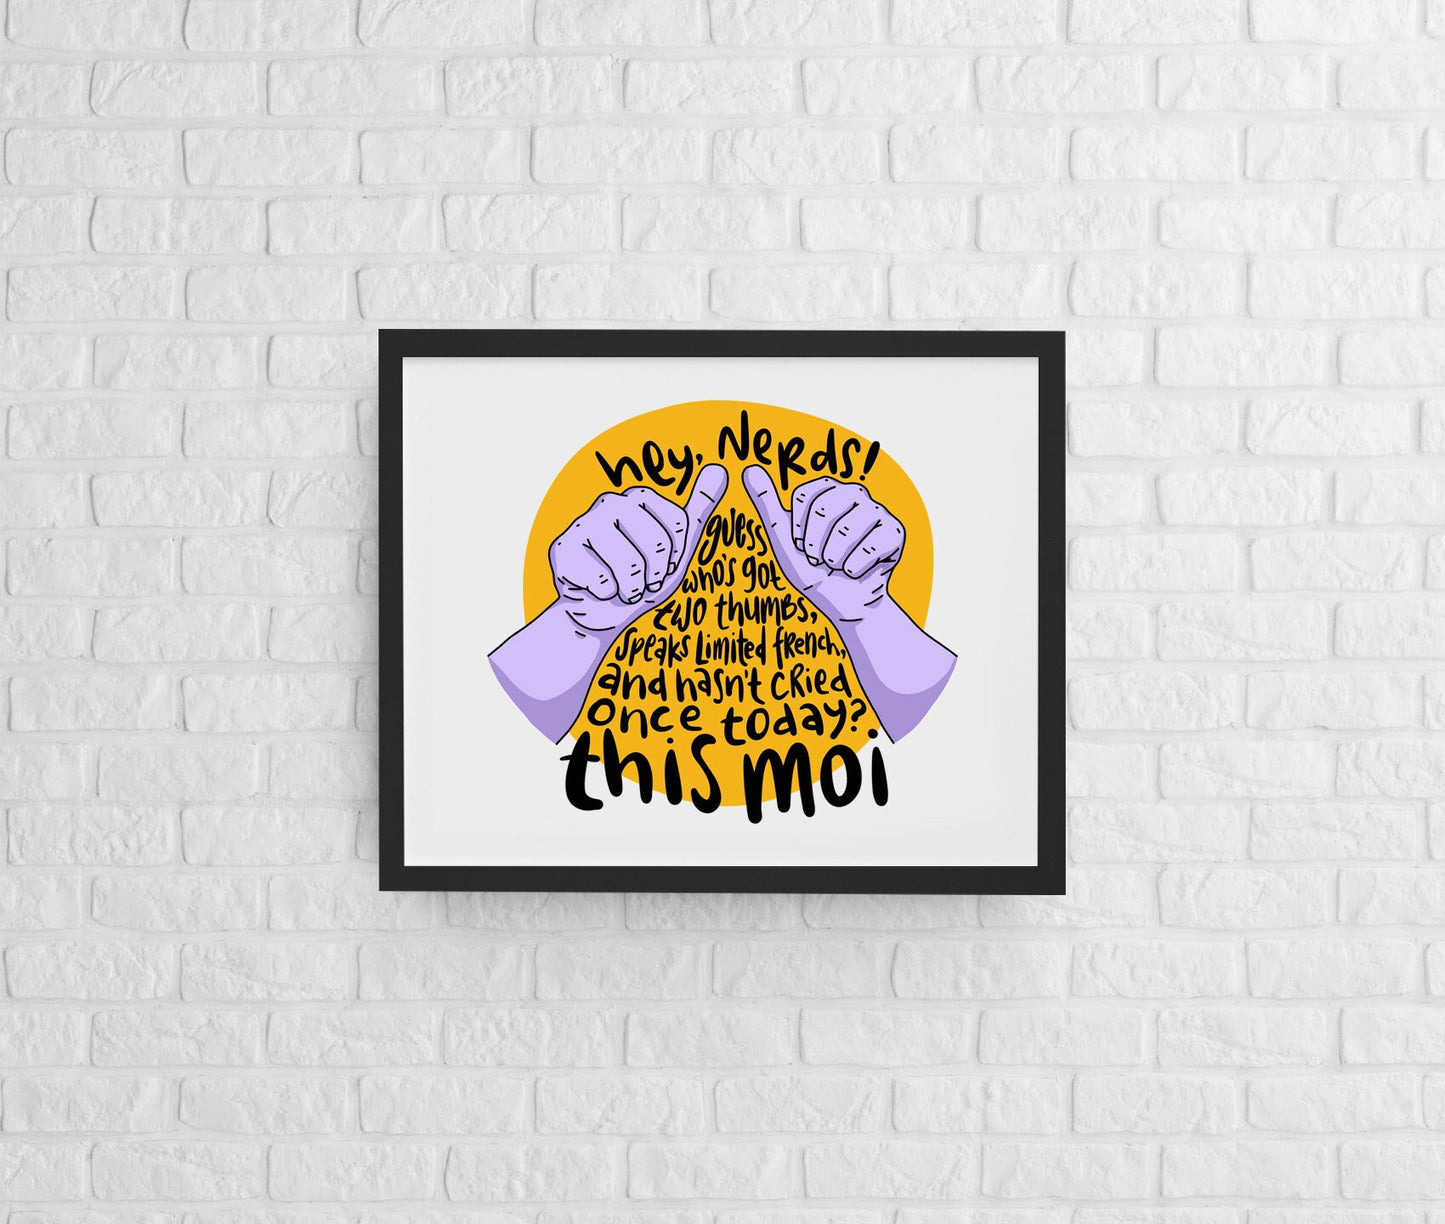 30 Rock This Moi ART PRINT - Wall Art - Two Thumbs Art Print, Liz Lemon Art Print, 30 Rock Art Print, Tina Fey Art Print, Limited French Art